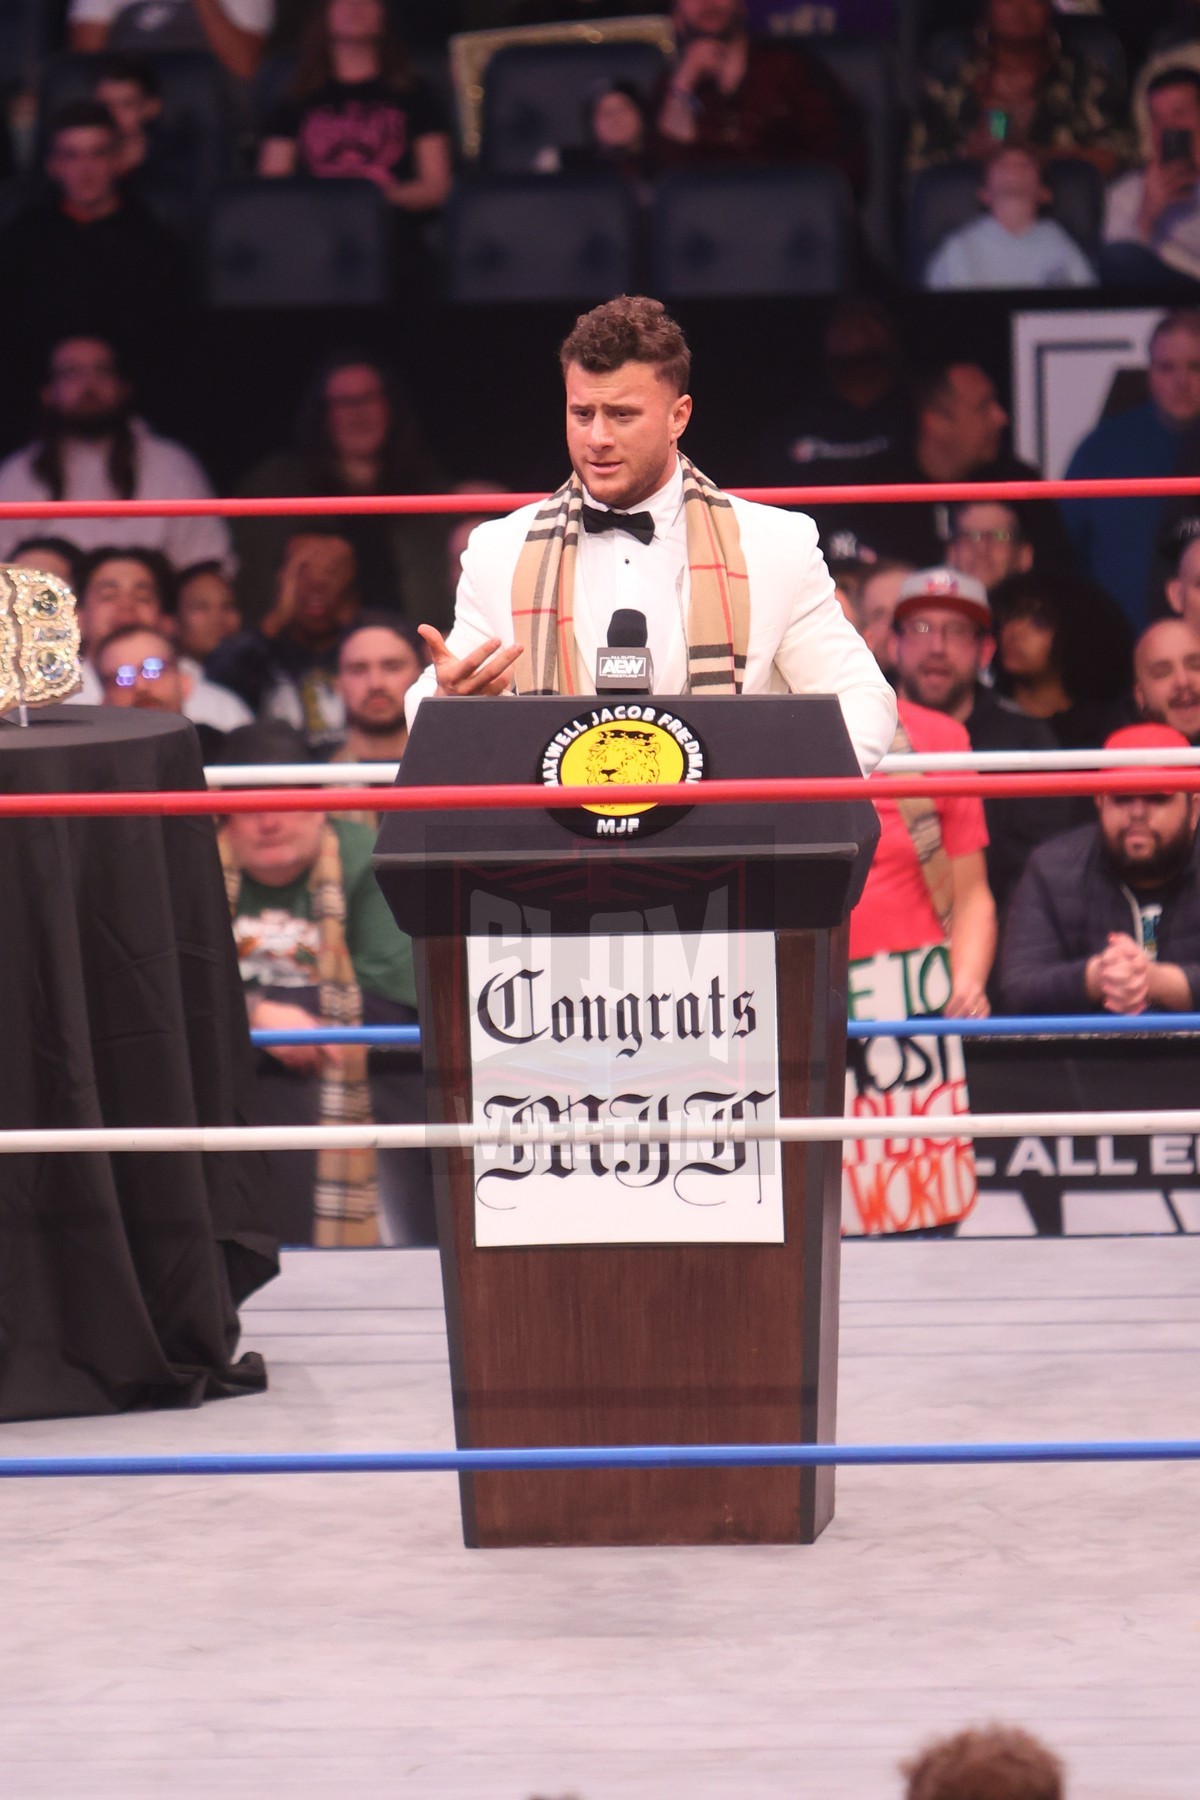 MJF speaks his mind at AEW Dynamite, at UBS Arena in Belmont Park, NY, on Long Island, on Wednesday, April 5, 2023. Photo by George Tahinos, https://georgetahinos.smugmug.com